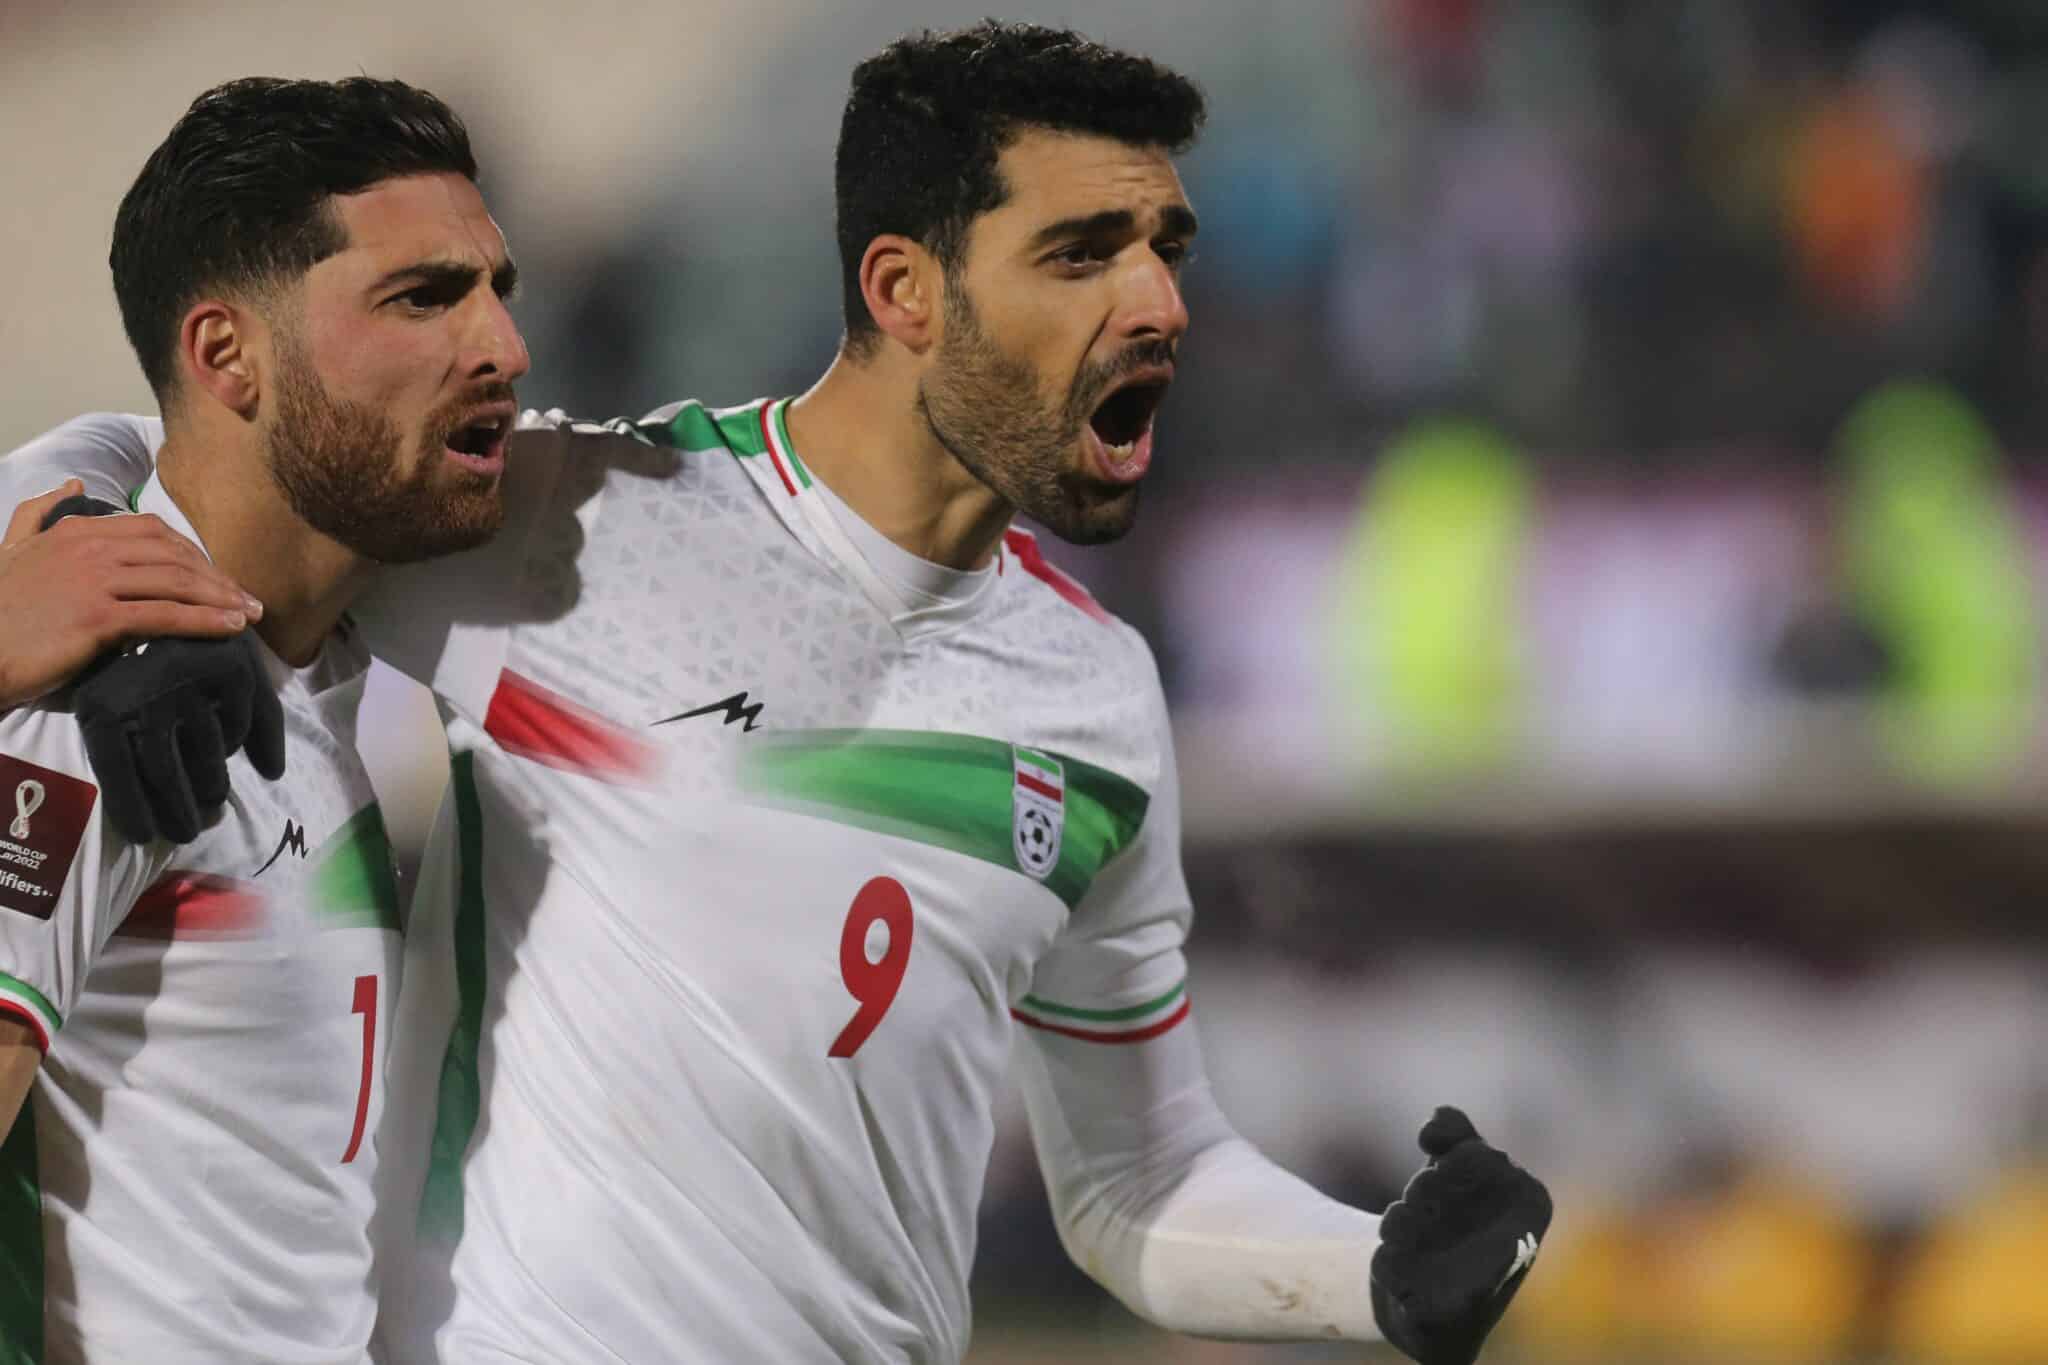 Iran's forward Mehdi Taremi (R) celebrates his opening goal with his teammates during the 2022 Qatar World Cup Asian Qualifiers football match between Iran and Iraq, at the Azadi Sports Complex in the capital Tehran, on January 27, 2022. (Photo by Atta KENARE / AFP) (Photo by ATTA KENARE/AFP via Getty Images)